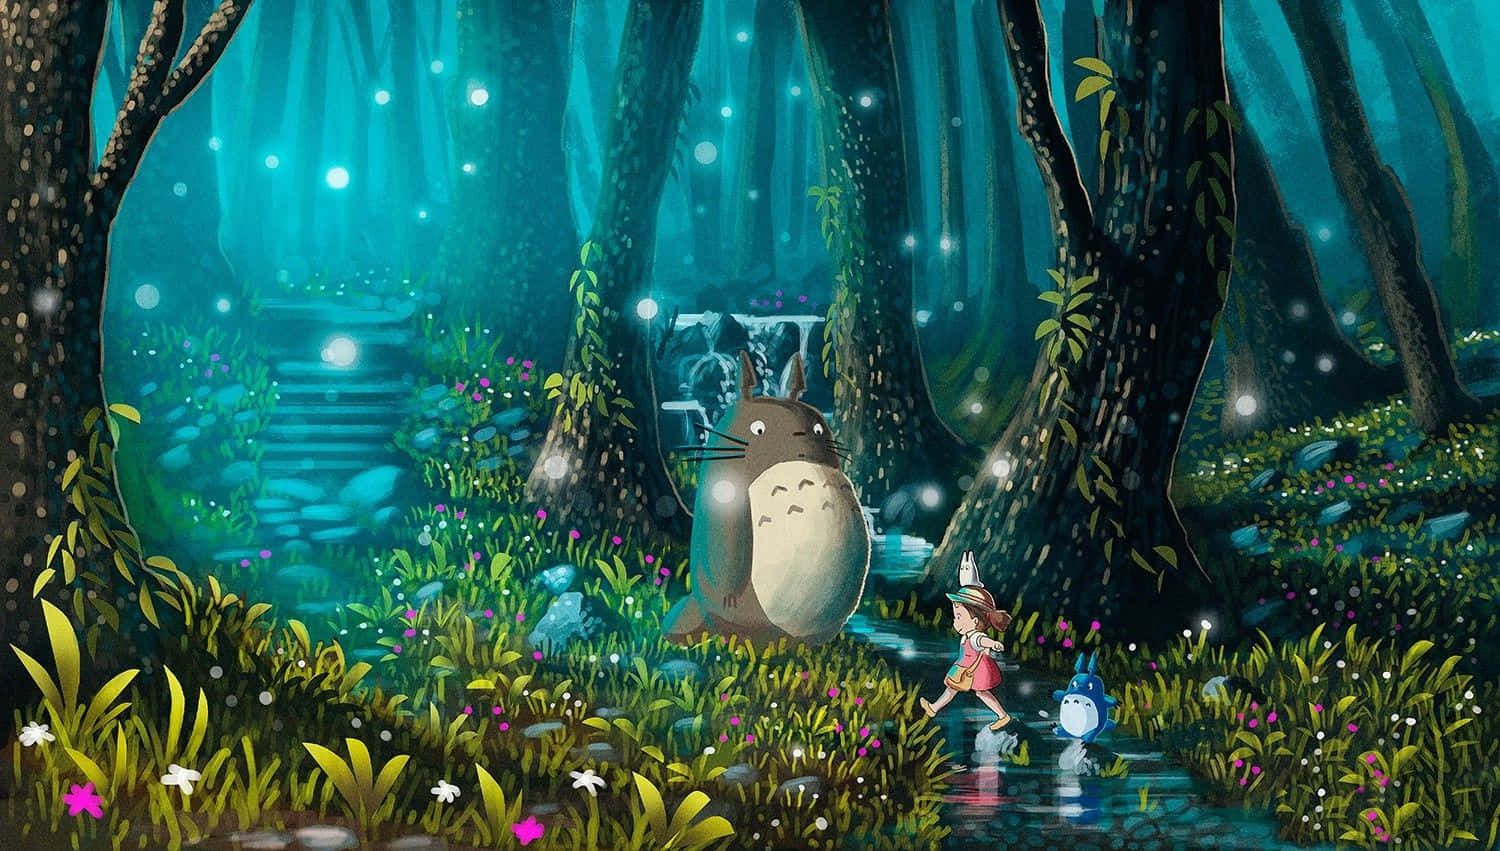 My Neighbor Totoro In A Magical Forest Wallpaper